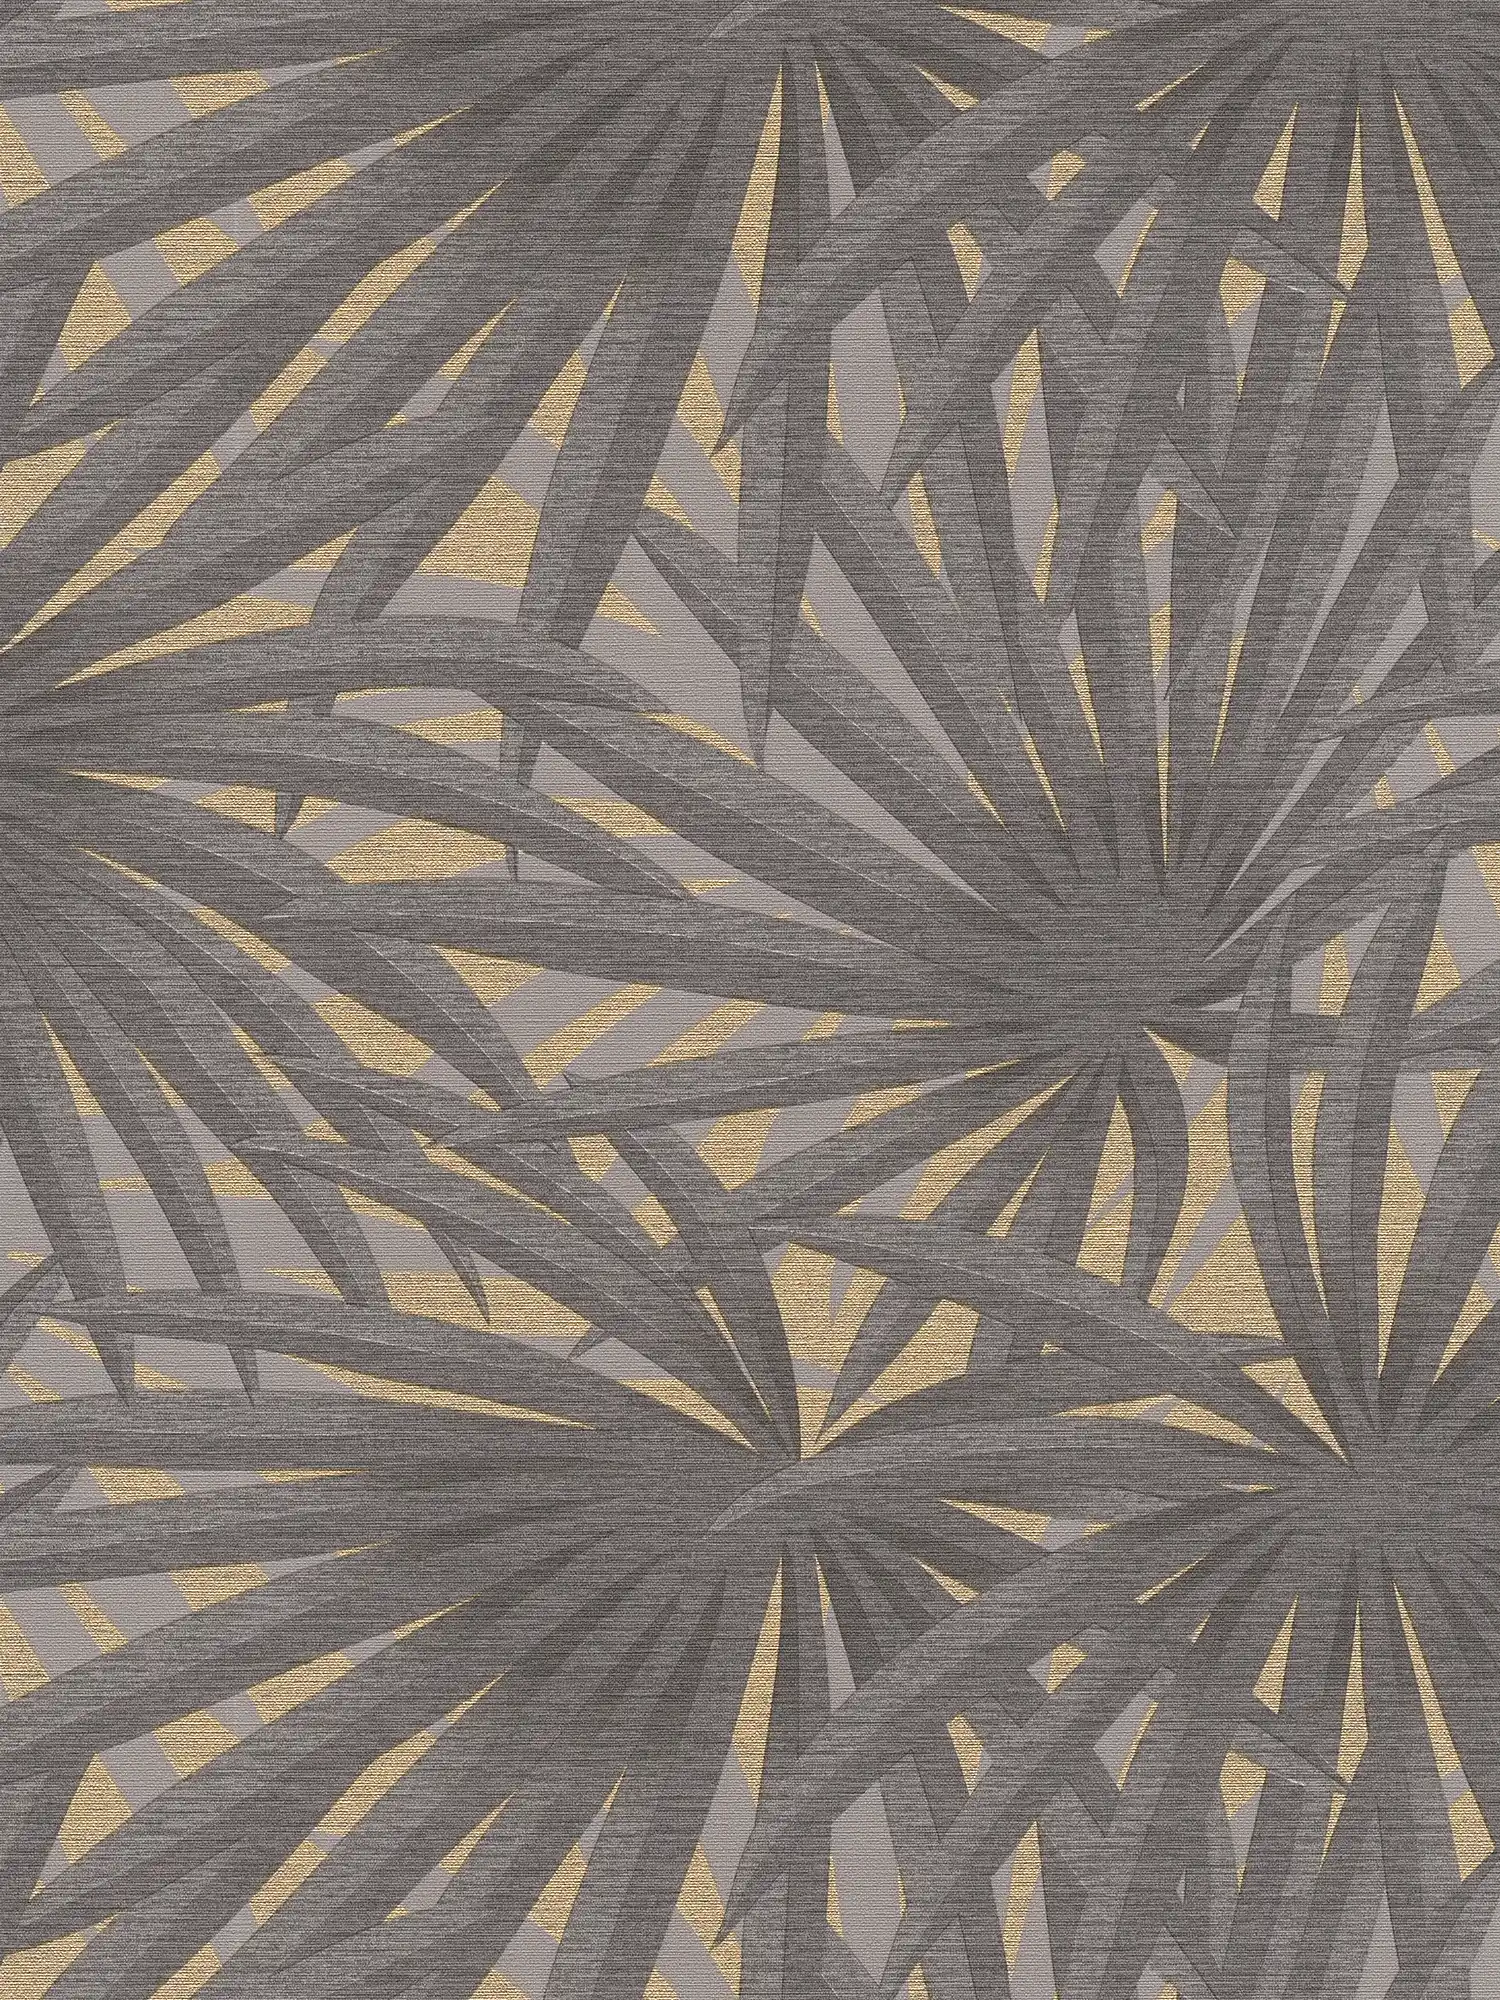 Wallpaper with leaf pattern and metallic accents - grey, metallic
